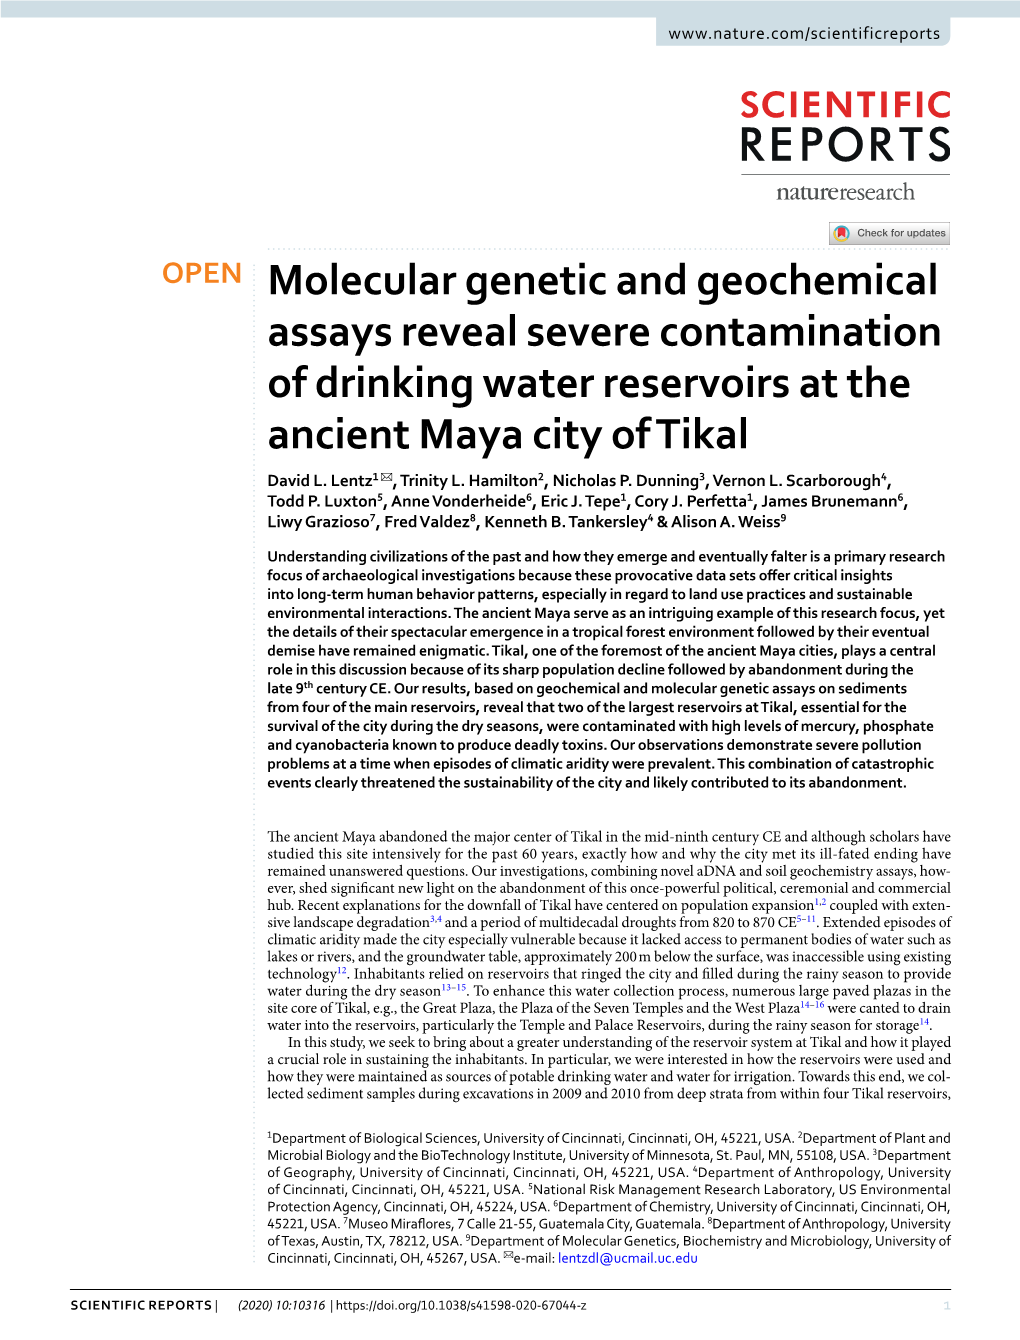 Molecular Genetic and Geochemical Assays Reveal Severe Contamination of Drinking Water Reservoirs at the Ancient Maya City of Tikal David L